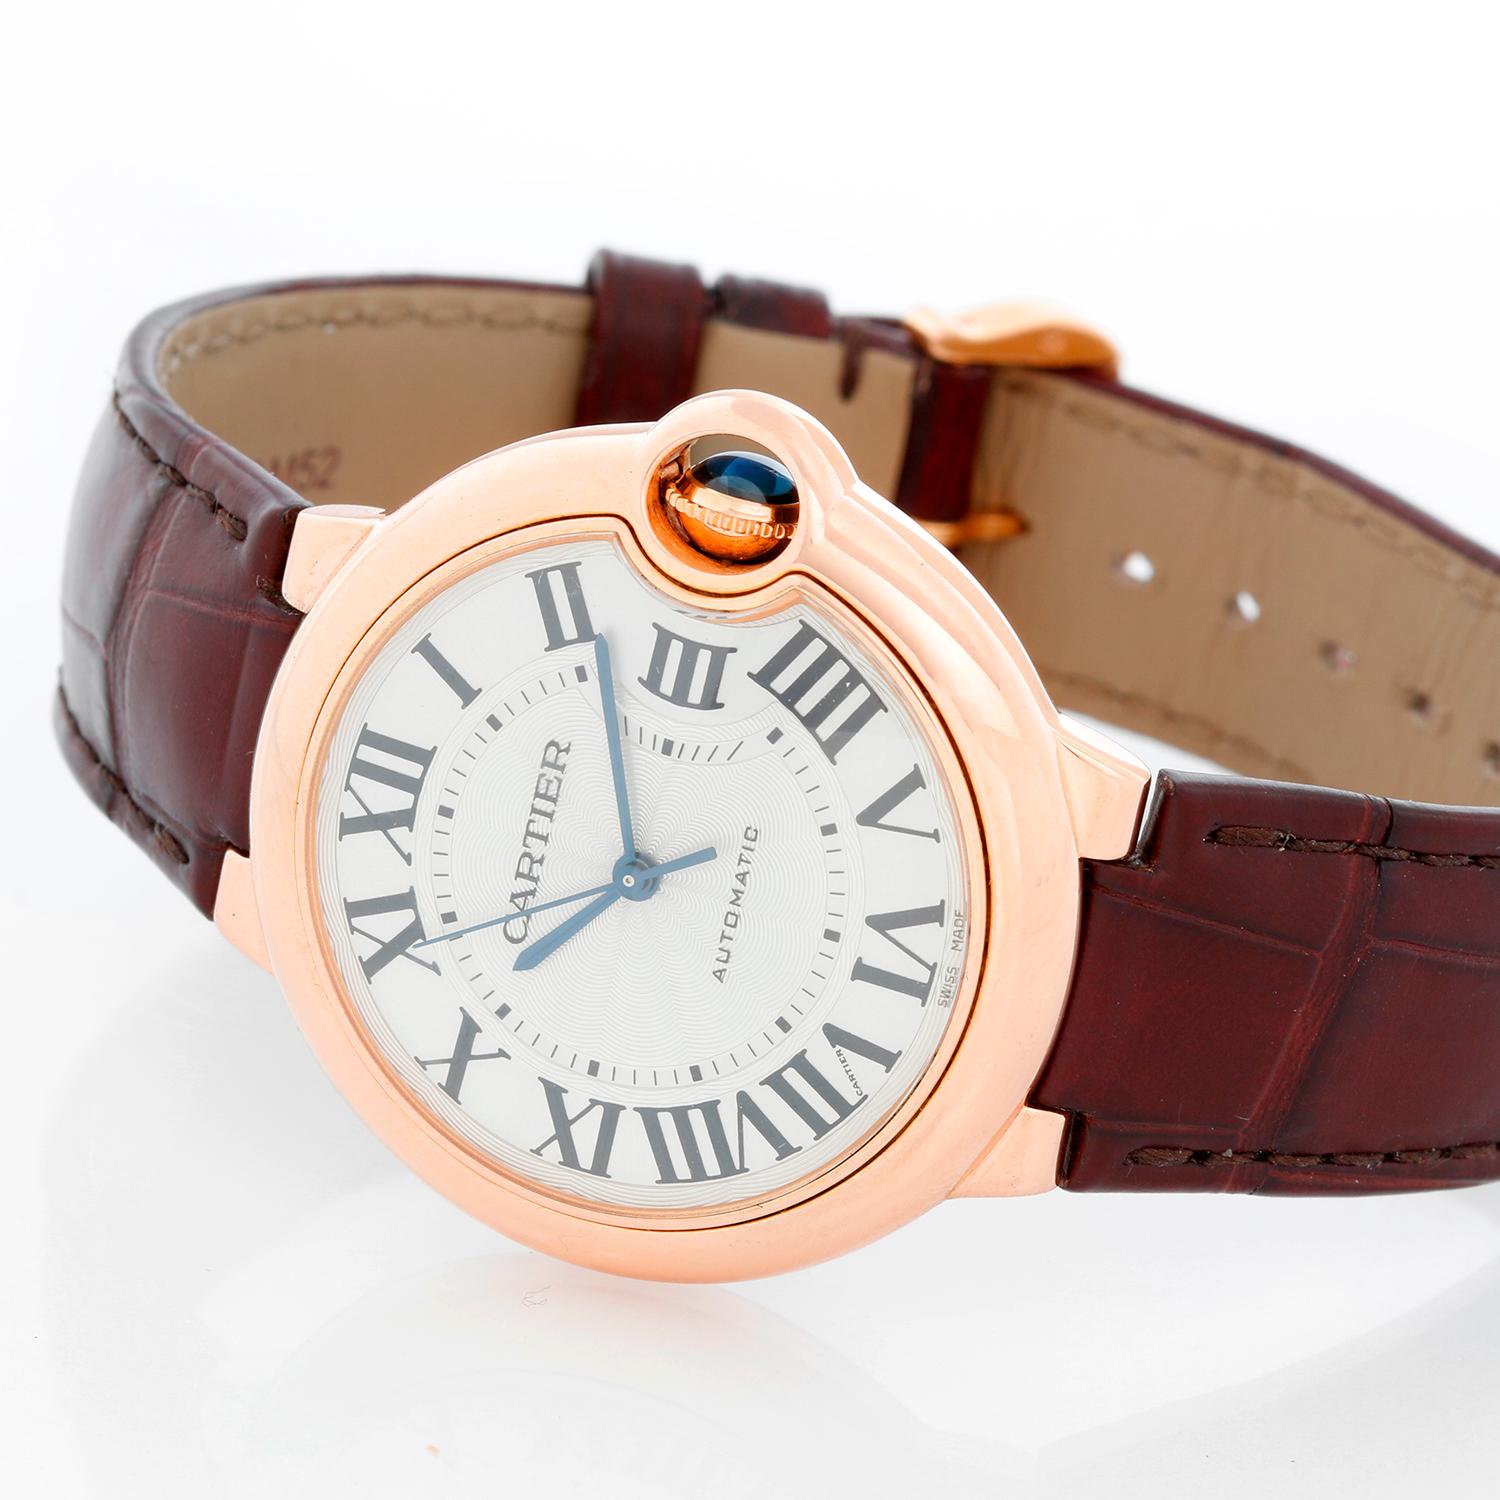 Cartier Ballon Bleu 18K Rose Gold Ladies Midsize Watch WGBB0009 - Automatic winding. 18k Rose gold  case (36 mm ). Silver guilloche dial with black Roman numerals. Brown strap. Pre-owned  with Cartier box .